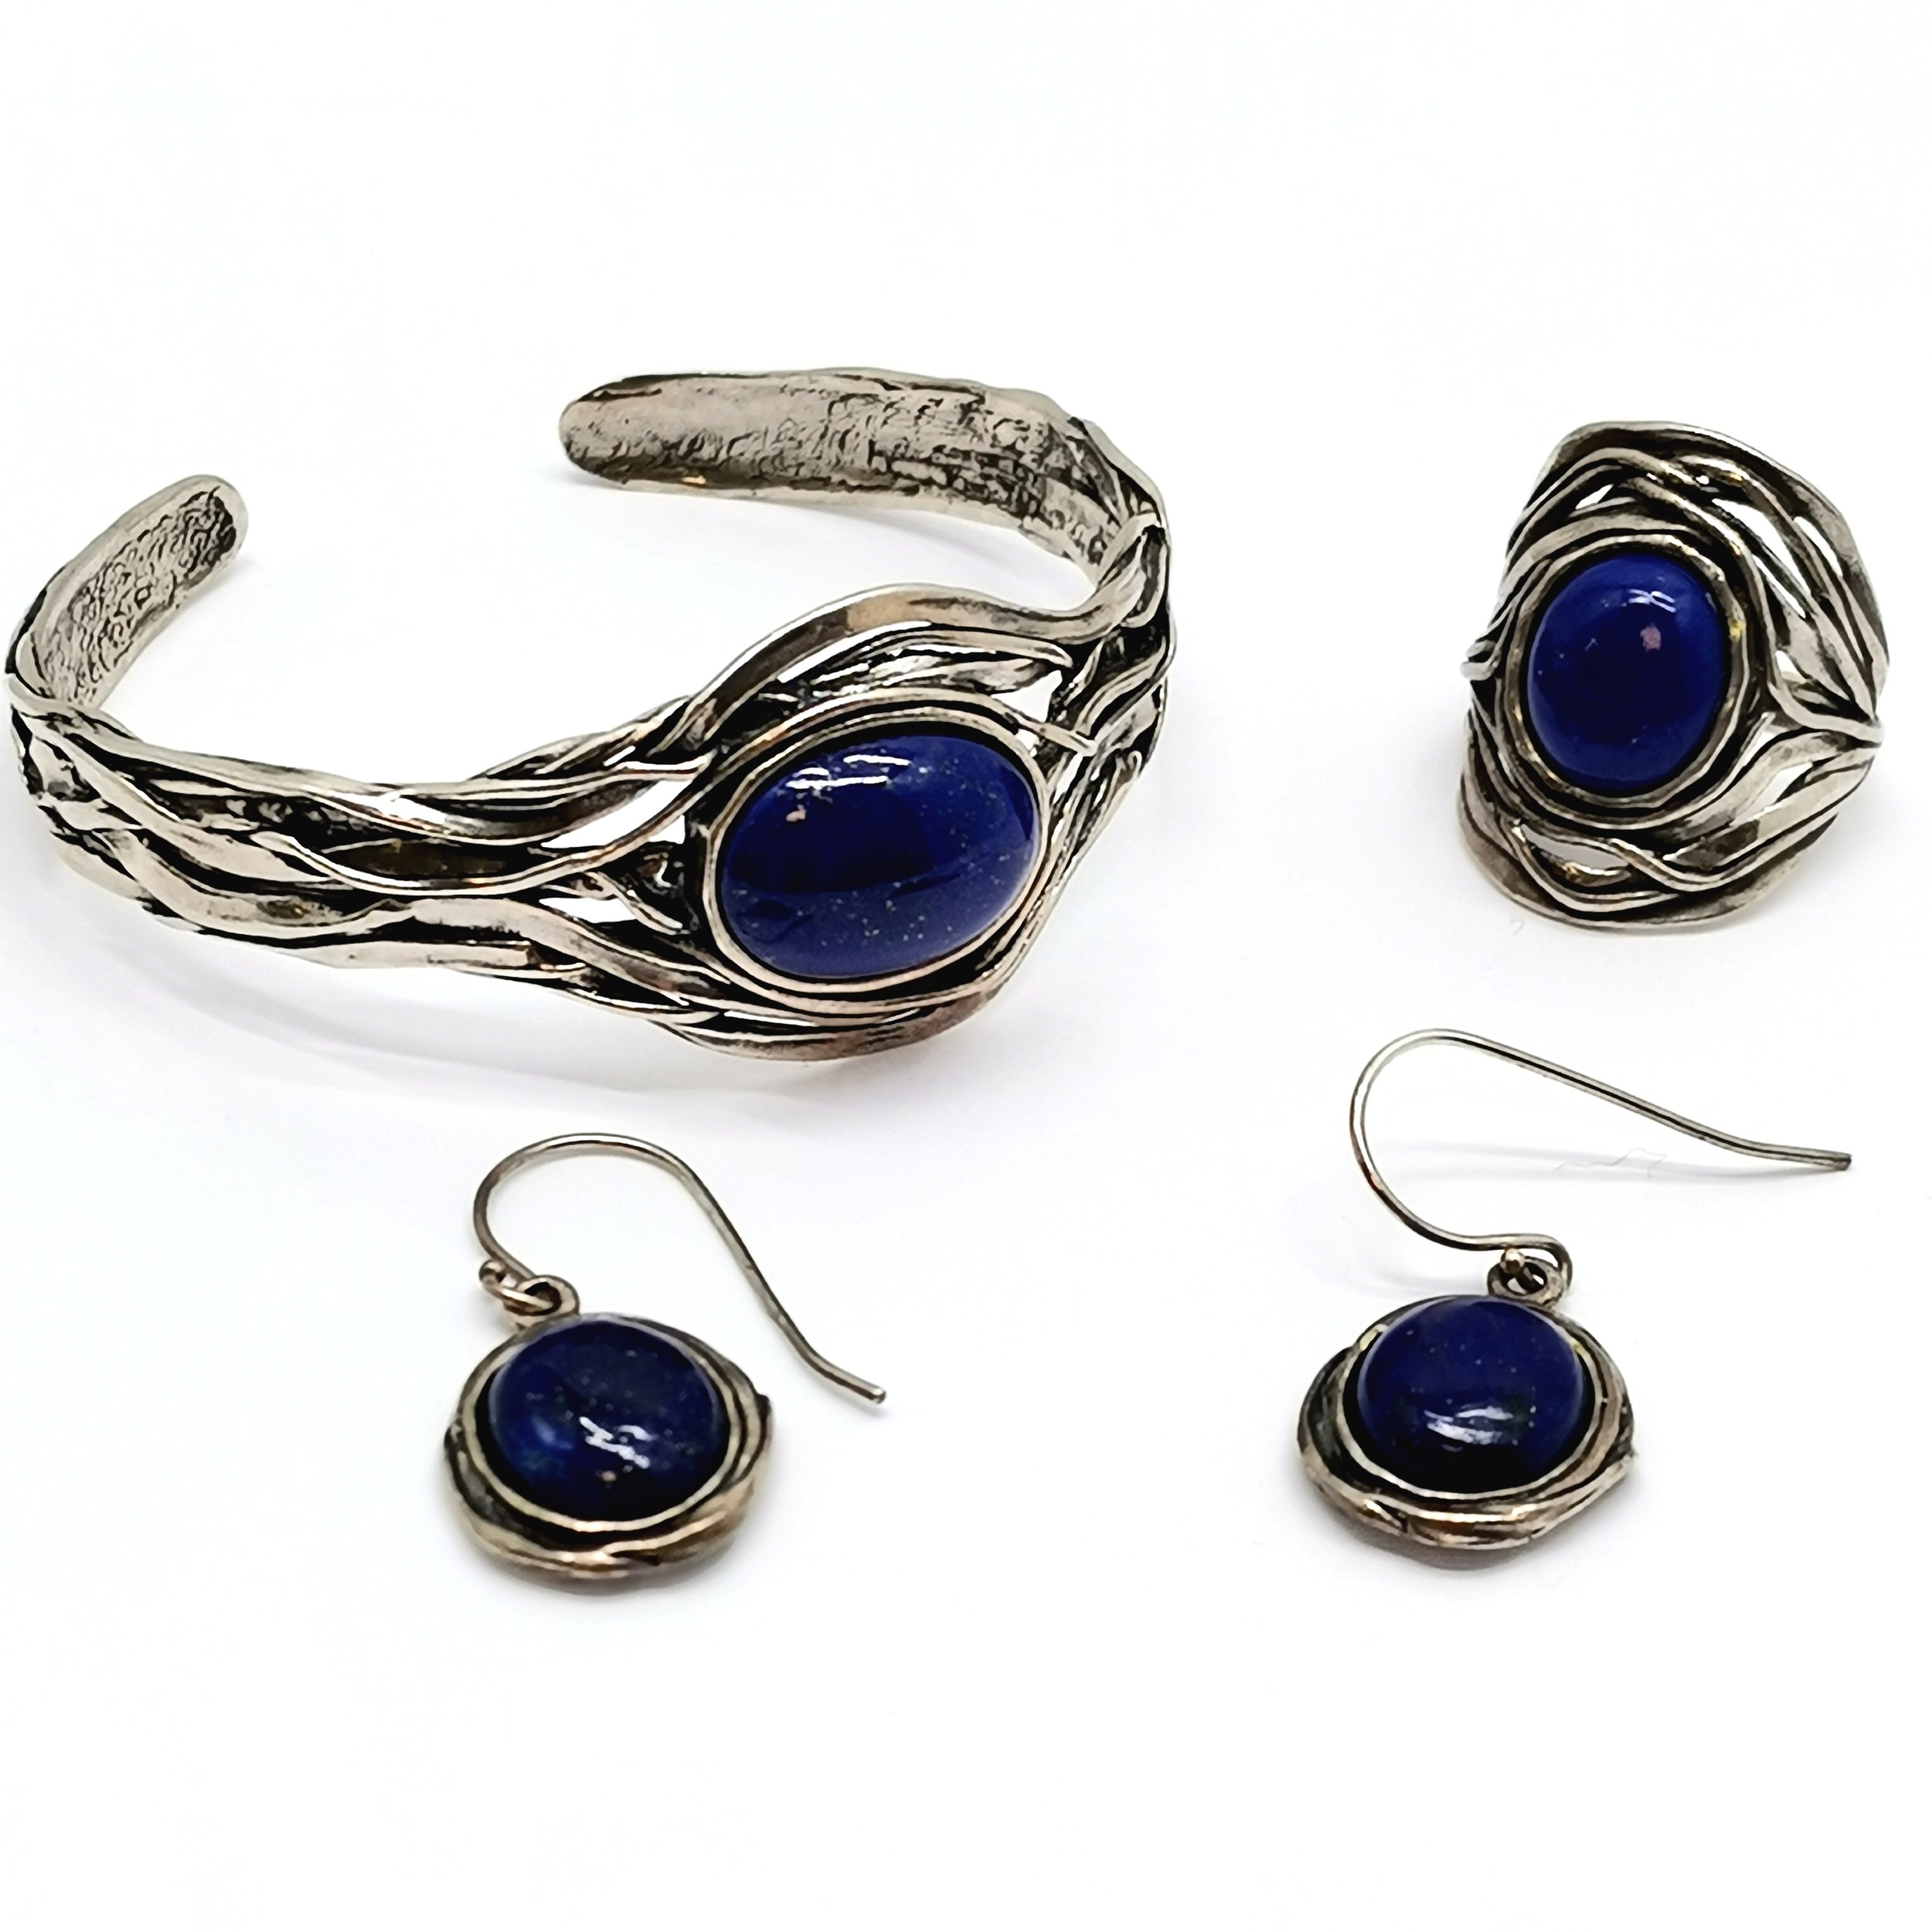 Israel silver lapis set ring (size O)/ earrings / cuff bangle by Paz - total weight 34g